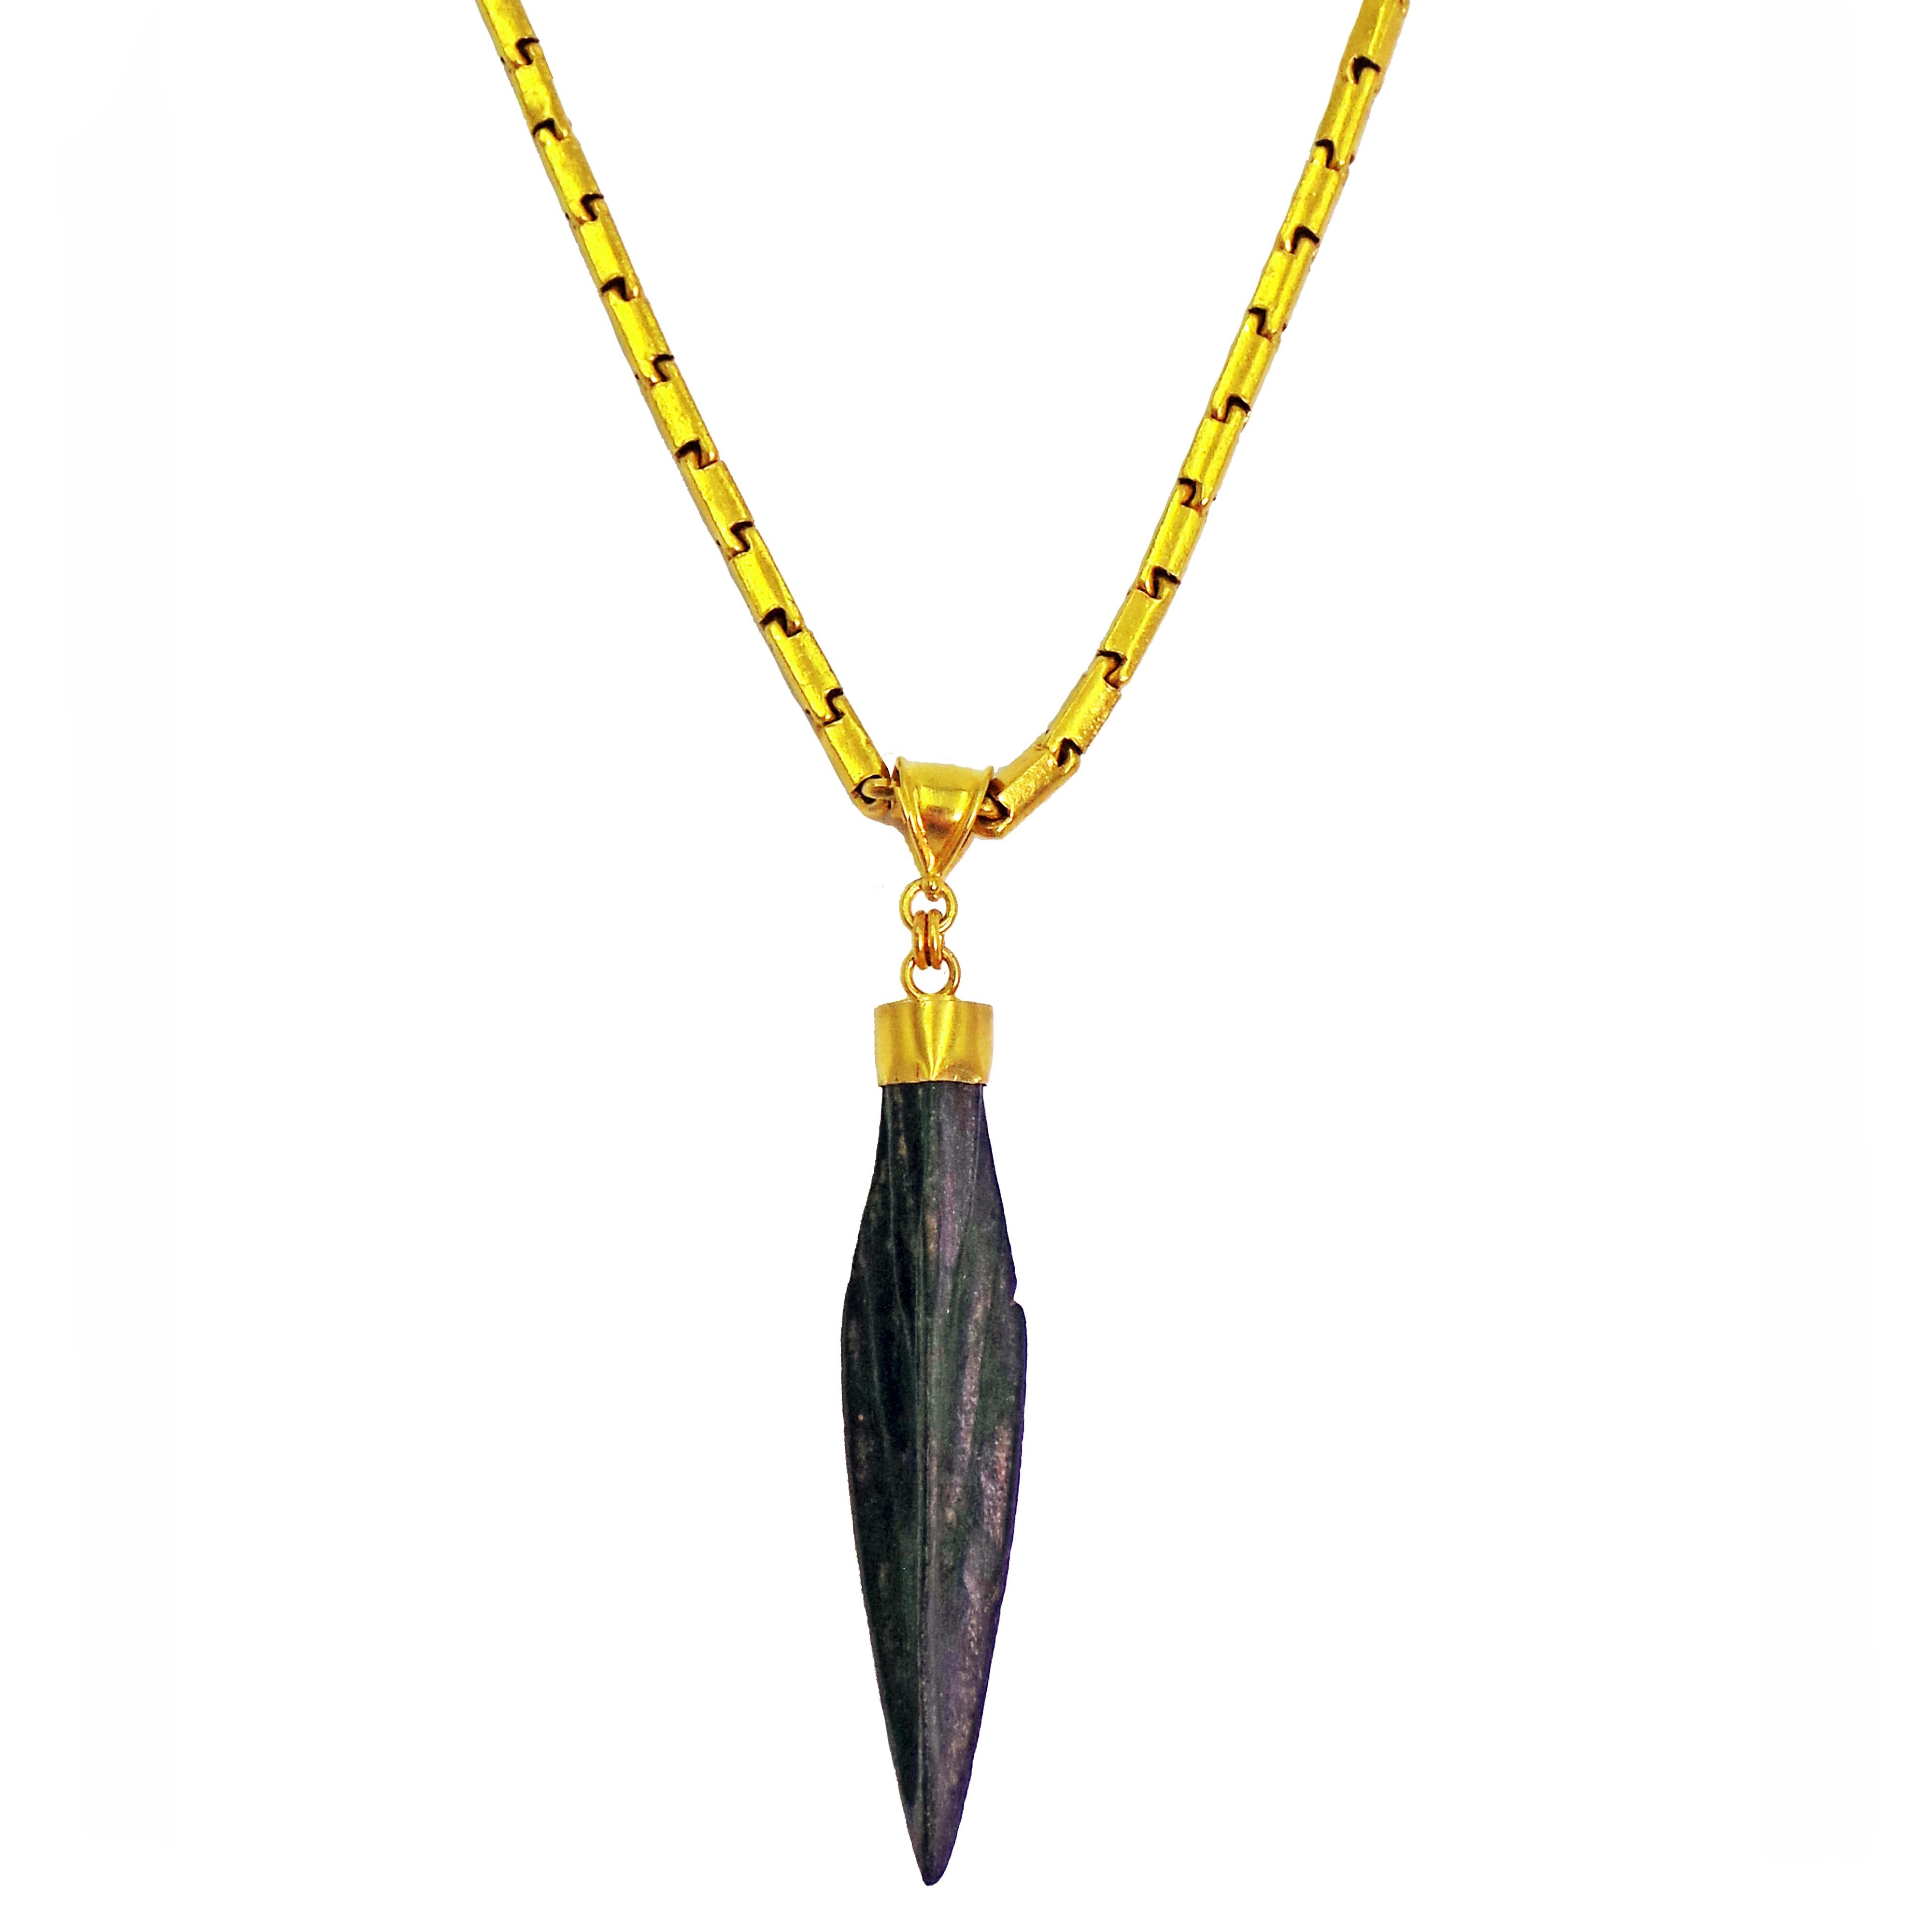 Authentic ancient Roman bronze arrowhead artifact set in a 22k gold pendant. Pendant is on a solid 22k gold 20 inch Baht chain finished with a hammered hook closure. Arrowhead pendant, including bail, is 2.32 inches in length. Unique, rich and